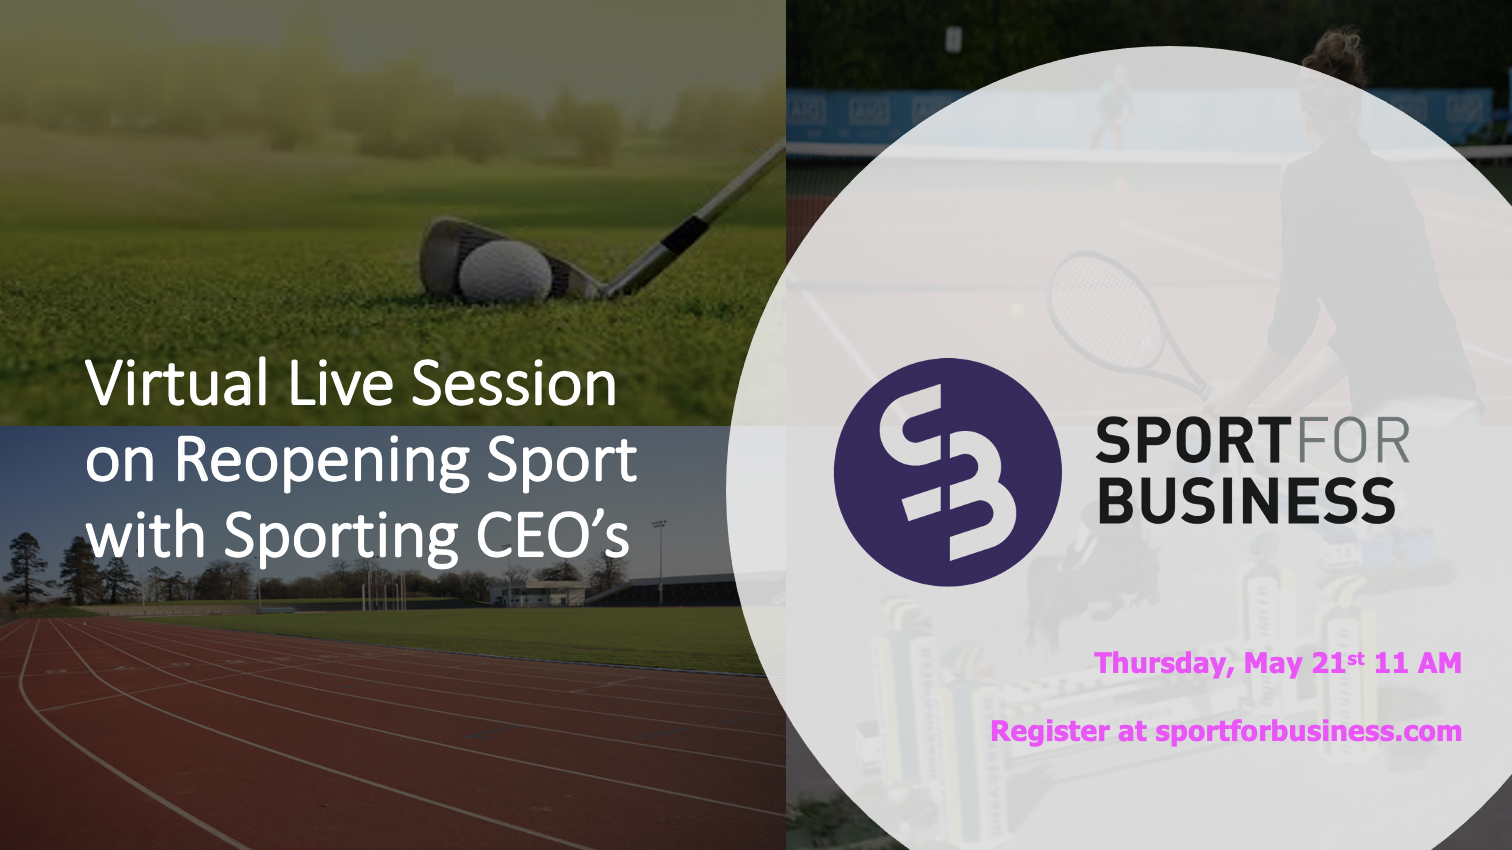 Virtual Live Session on Reopening Sport with Sporting CEO's